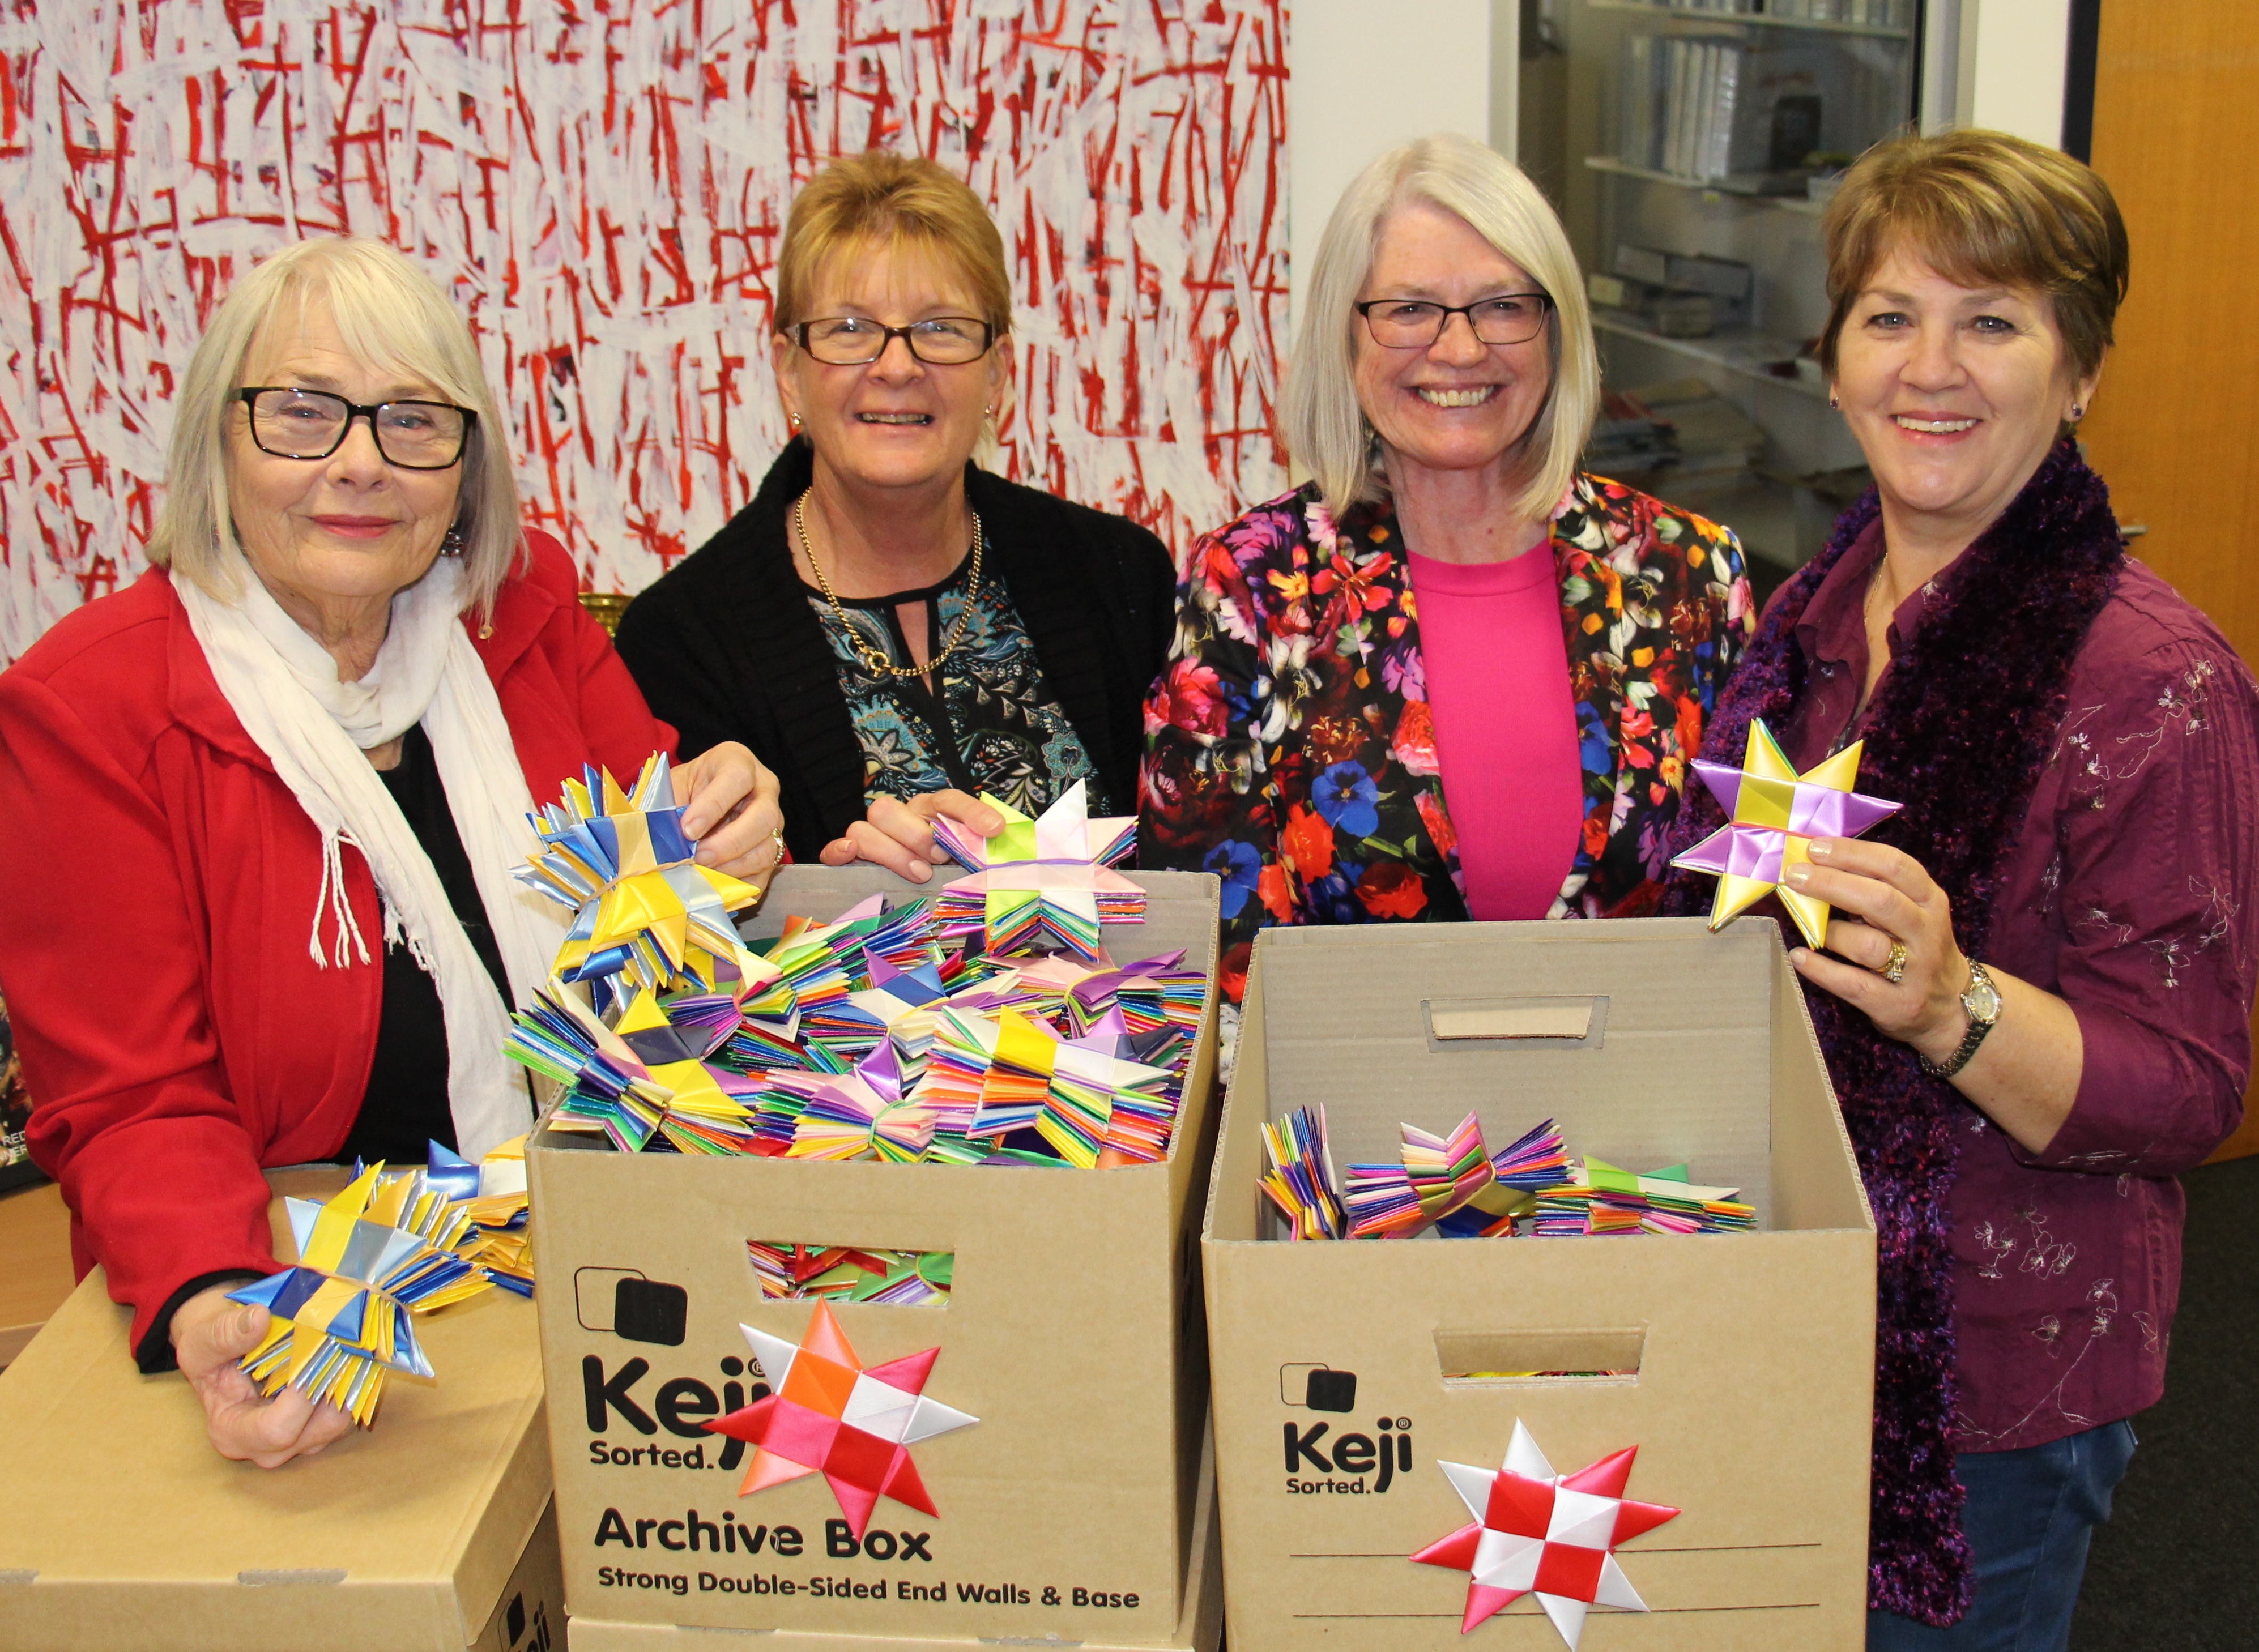 Professor Lesley Chenoweth AO, Heather Smith, Education and Professional Studies, Linda O'Brien, incoming Head of Logan campus and Ileana Whelan, Library and Learning Services, pack up Griffith’s contribution to the 1 Million Stars project for delivery.